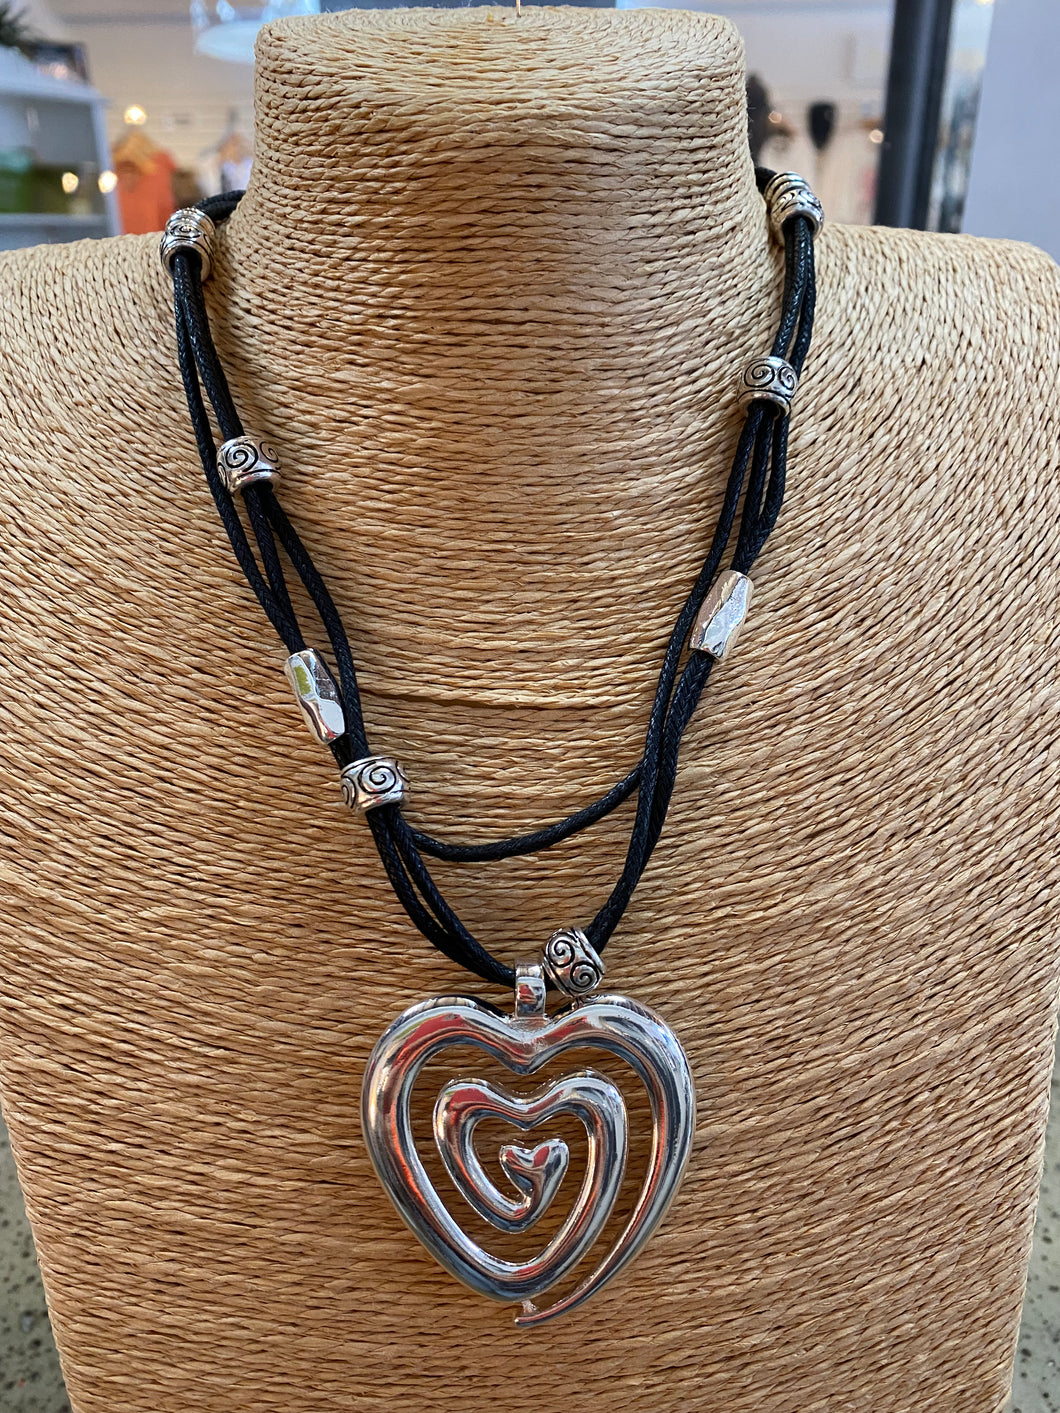 Swirled Heart Necklace (Only 1 Left!)